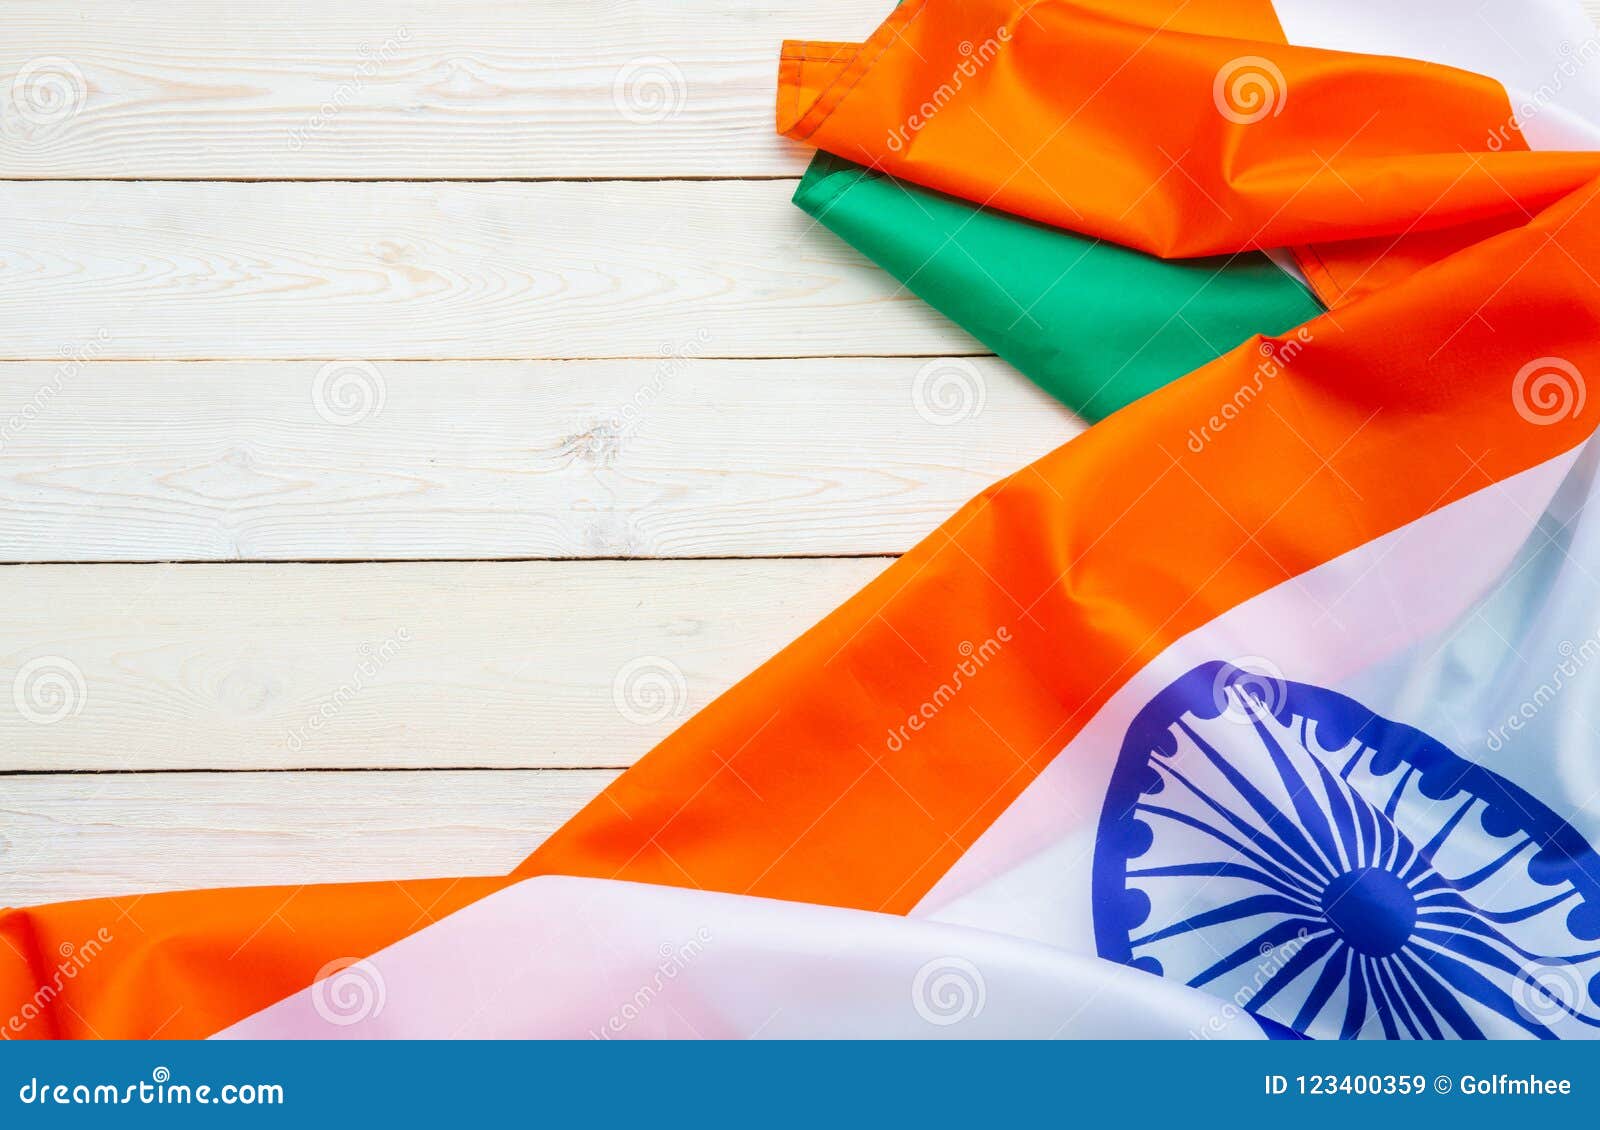 India Flag on Wood Texture Background Concept for 15 August Independence  Day Wallpaper, Happy 26 January Republic Day Banner Stock Image - Image of  august, concept: 123400359